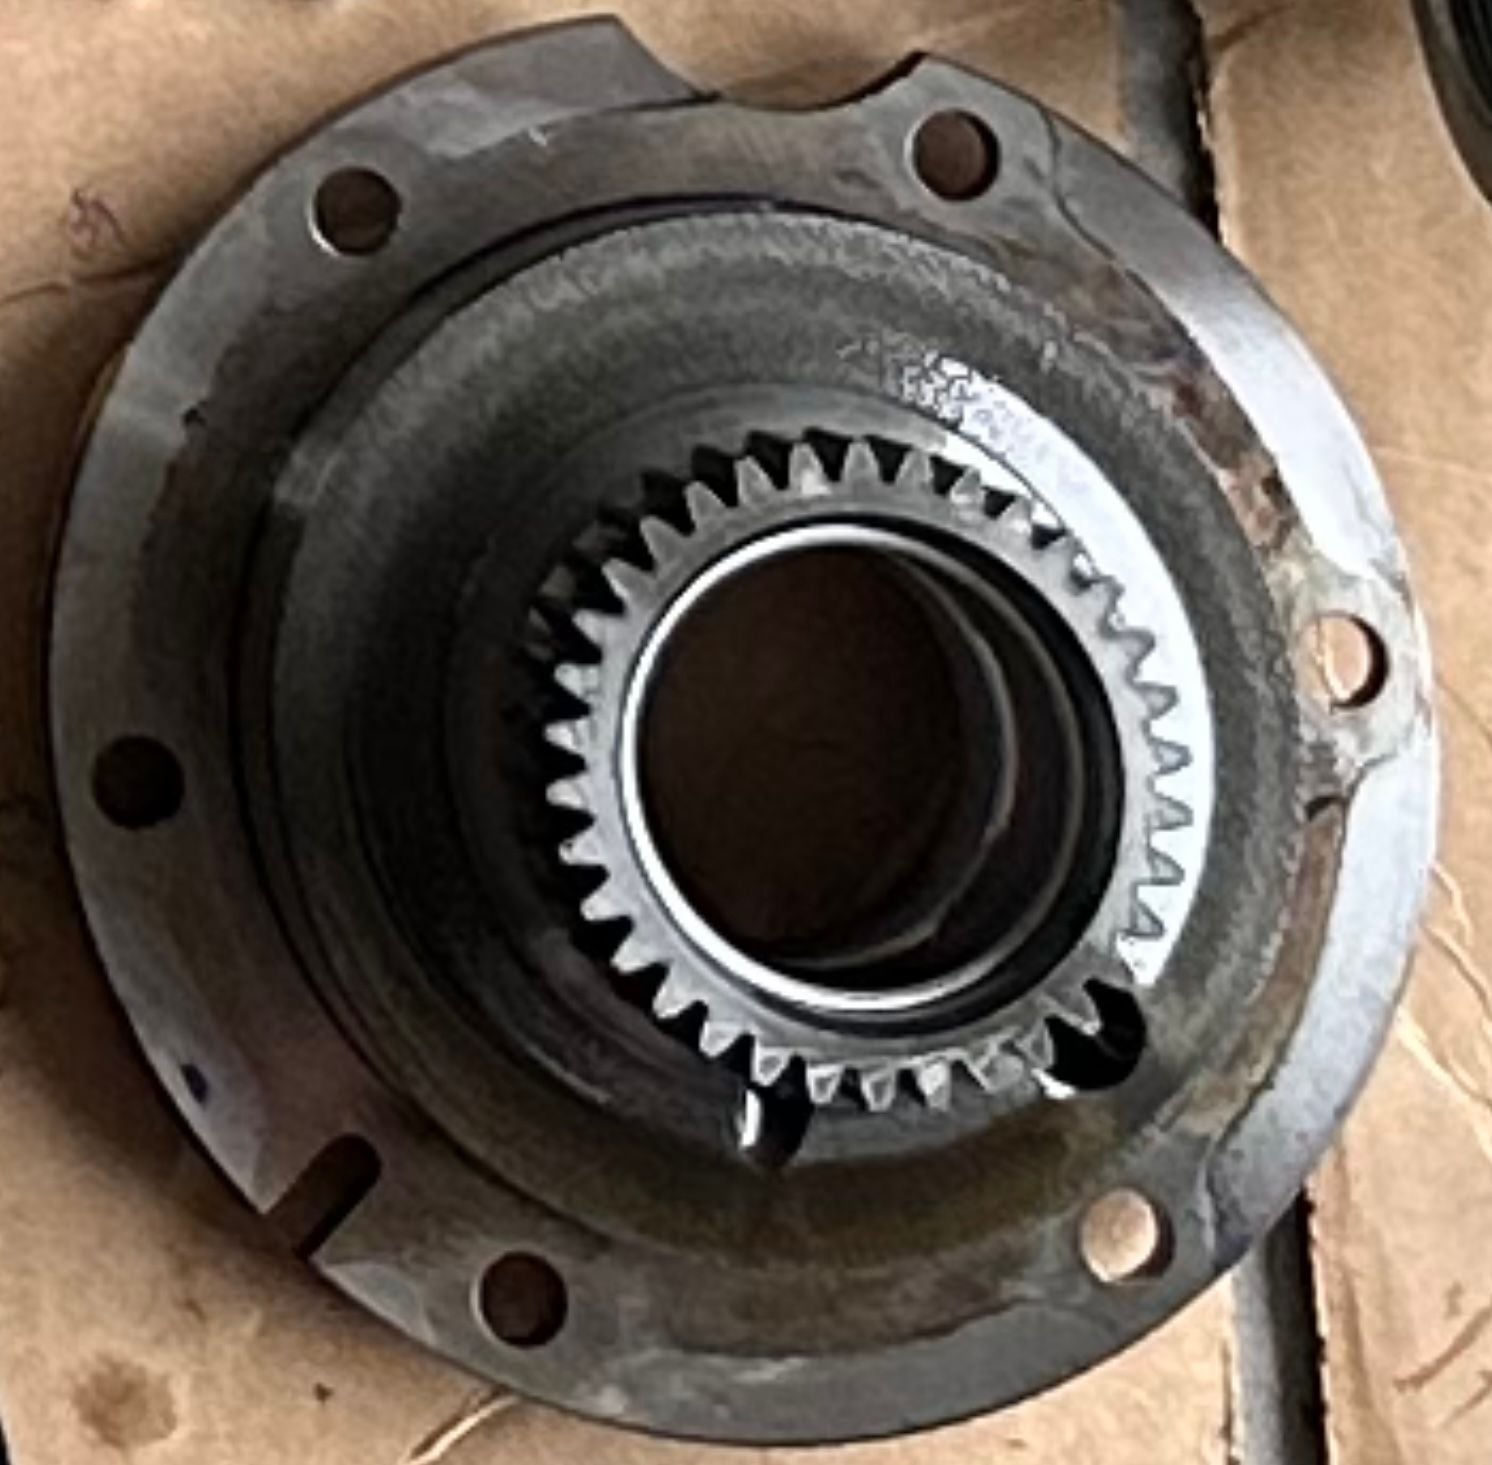 1994 Mazda RX-7 - Rear Stationary Gear - Accessories - $175 - Palmdale, CA 93551, United States